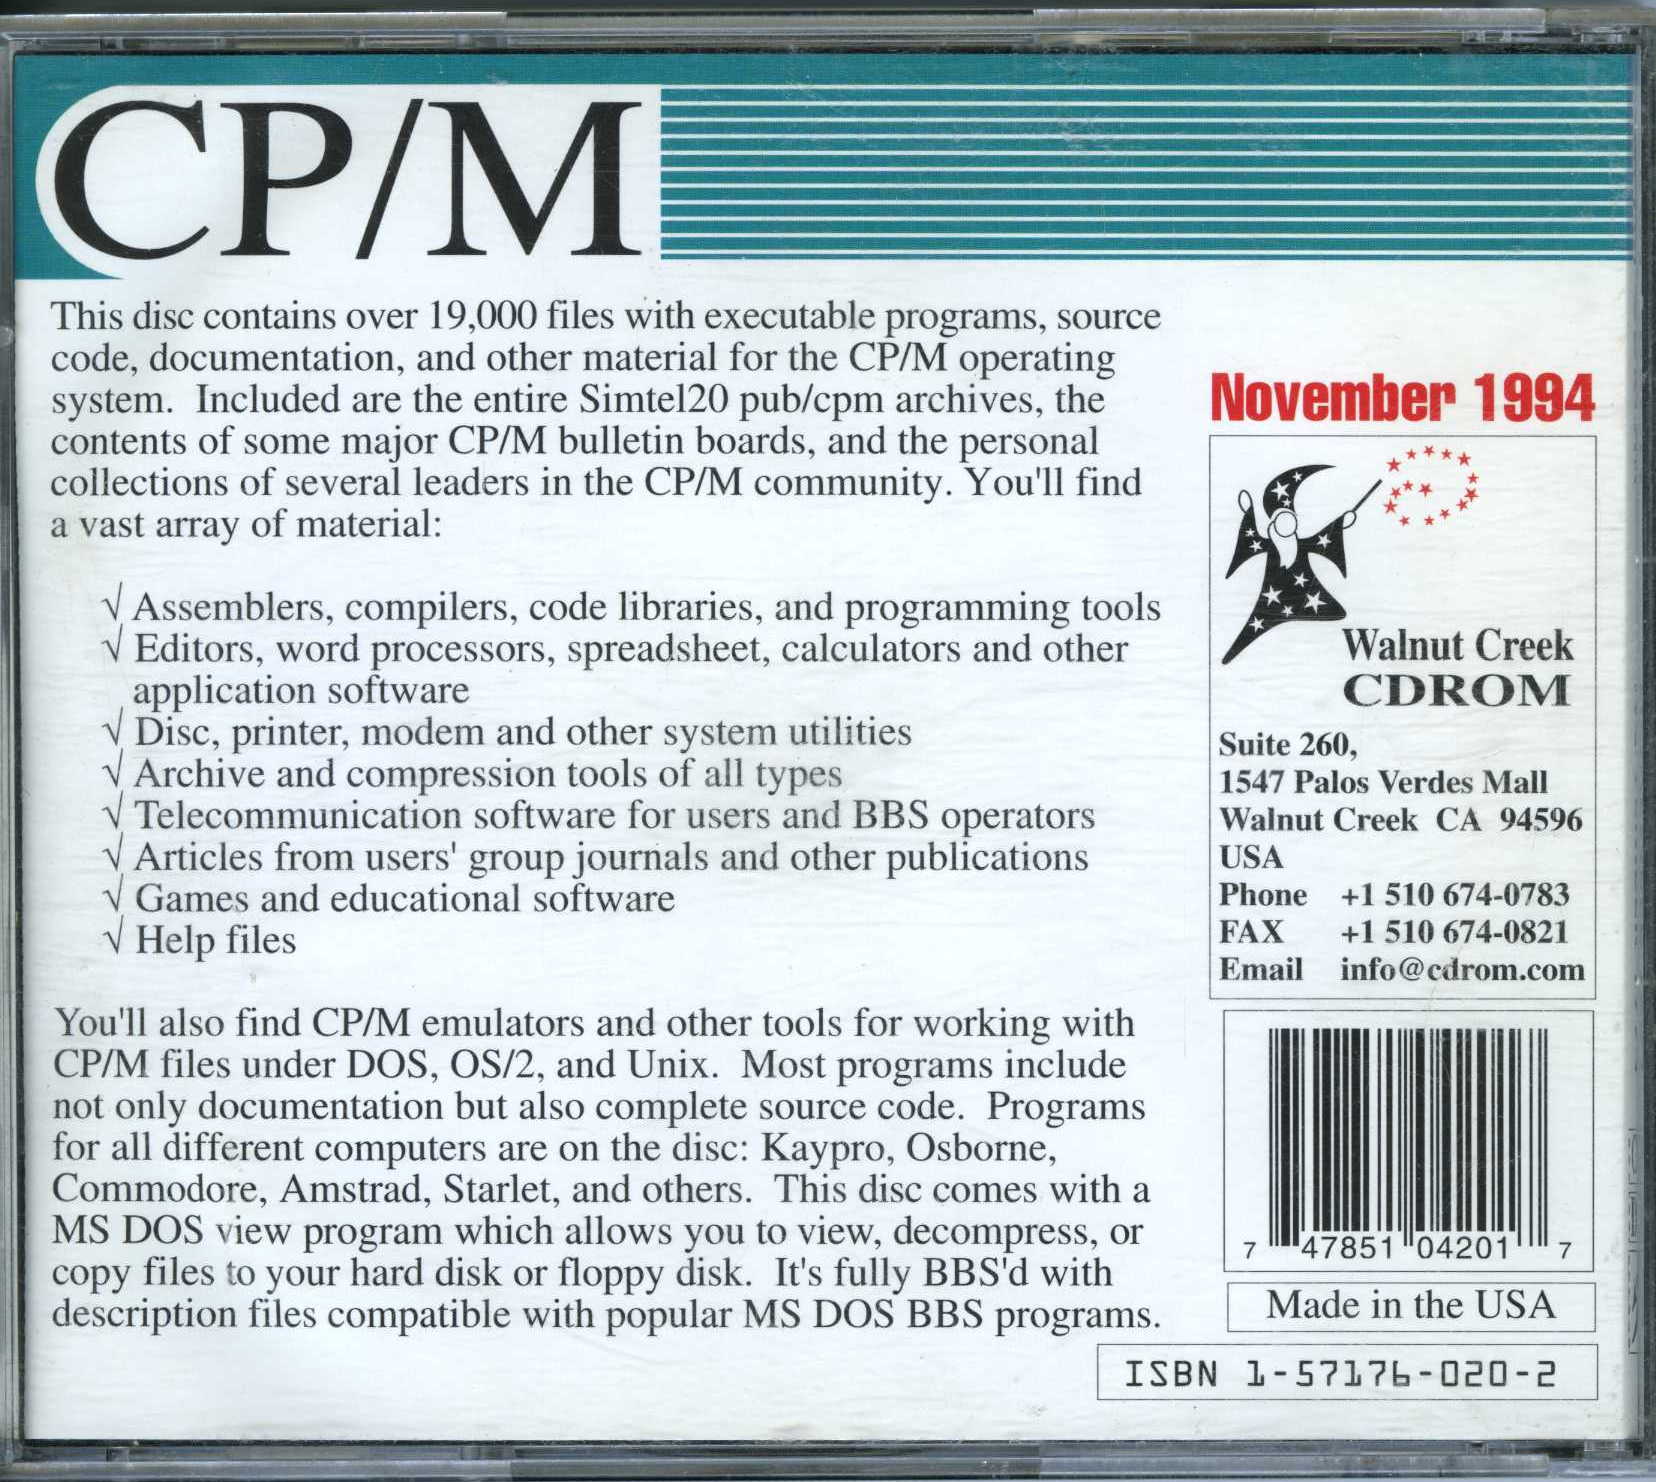 back cover of the Walnut Creek CPM CD-ROM